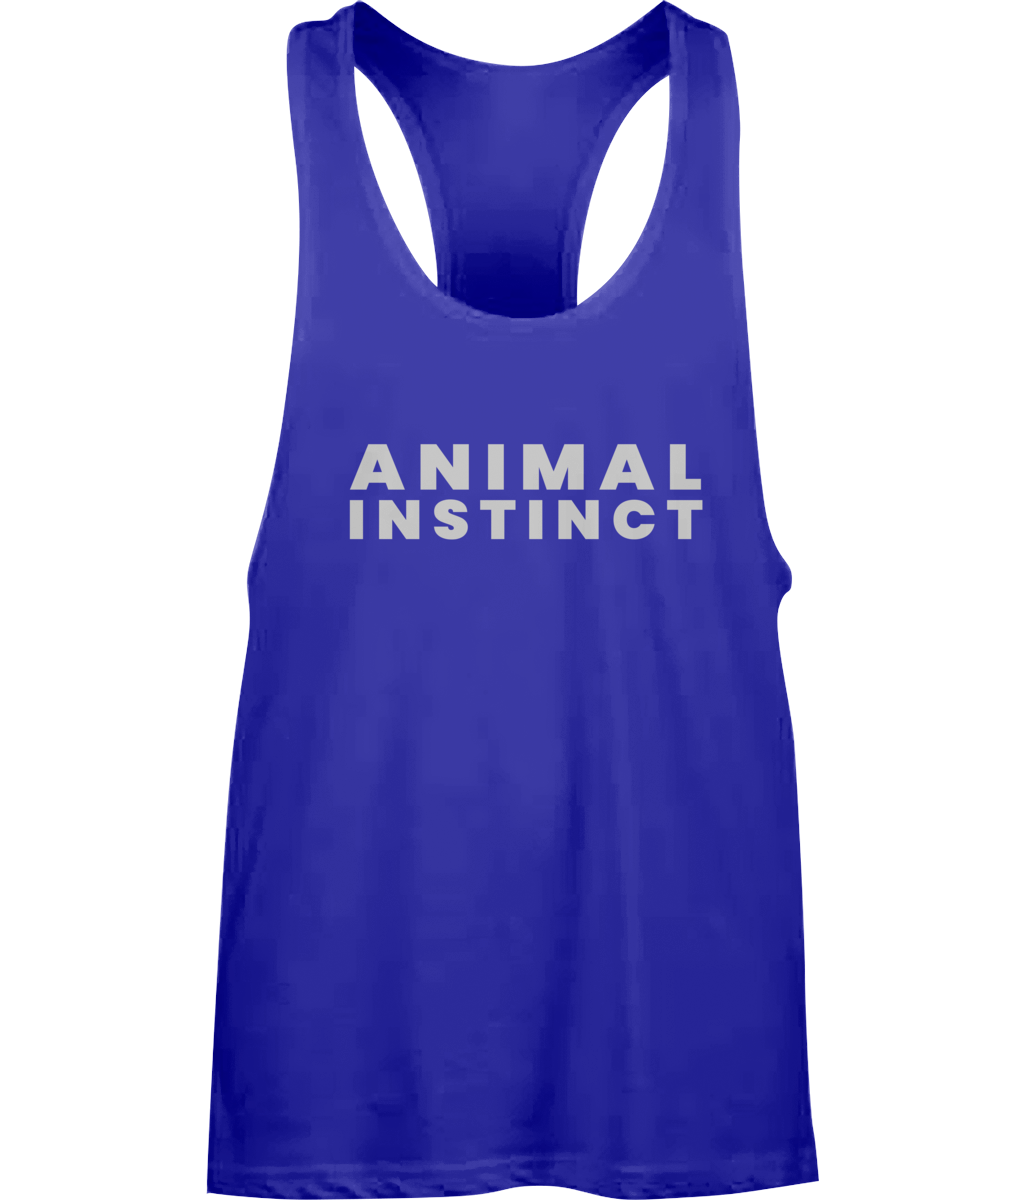 Mens Blue Workout Hardcore Muscle Vest with large thick Animal Instinct font across the chest